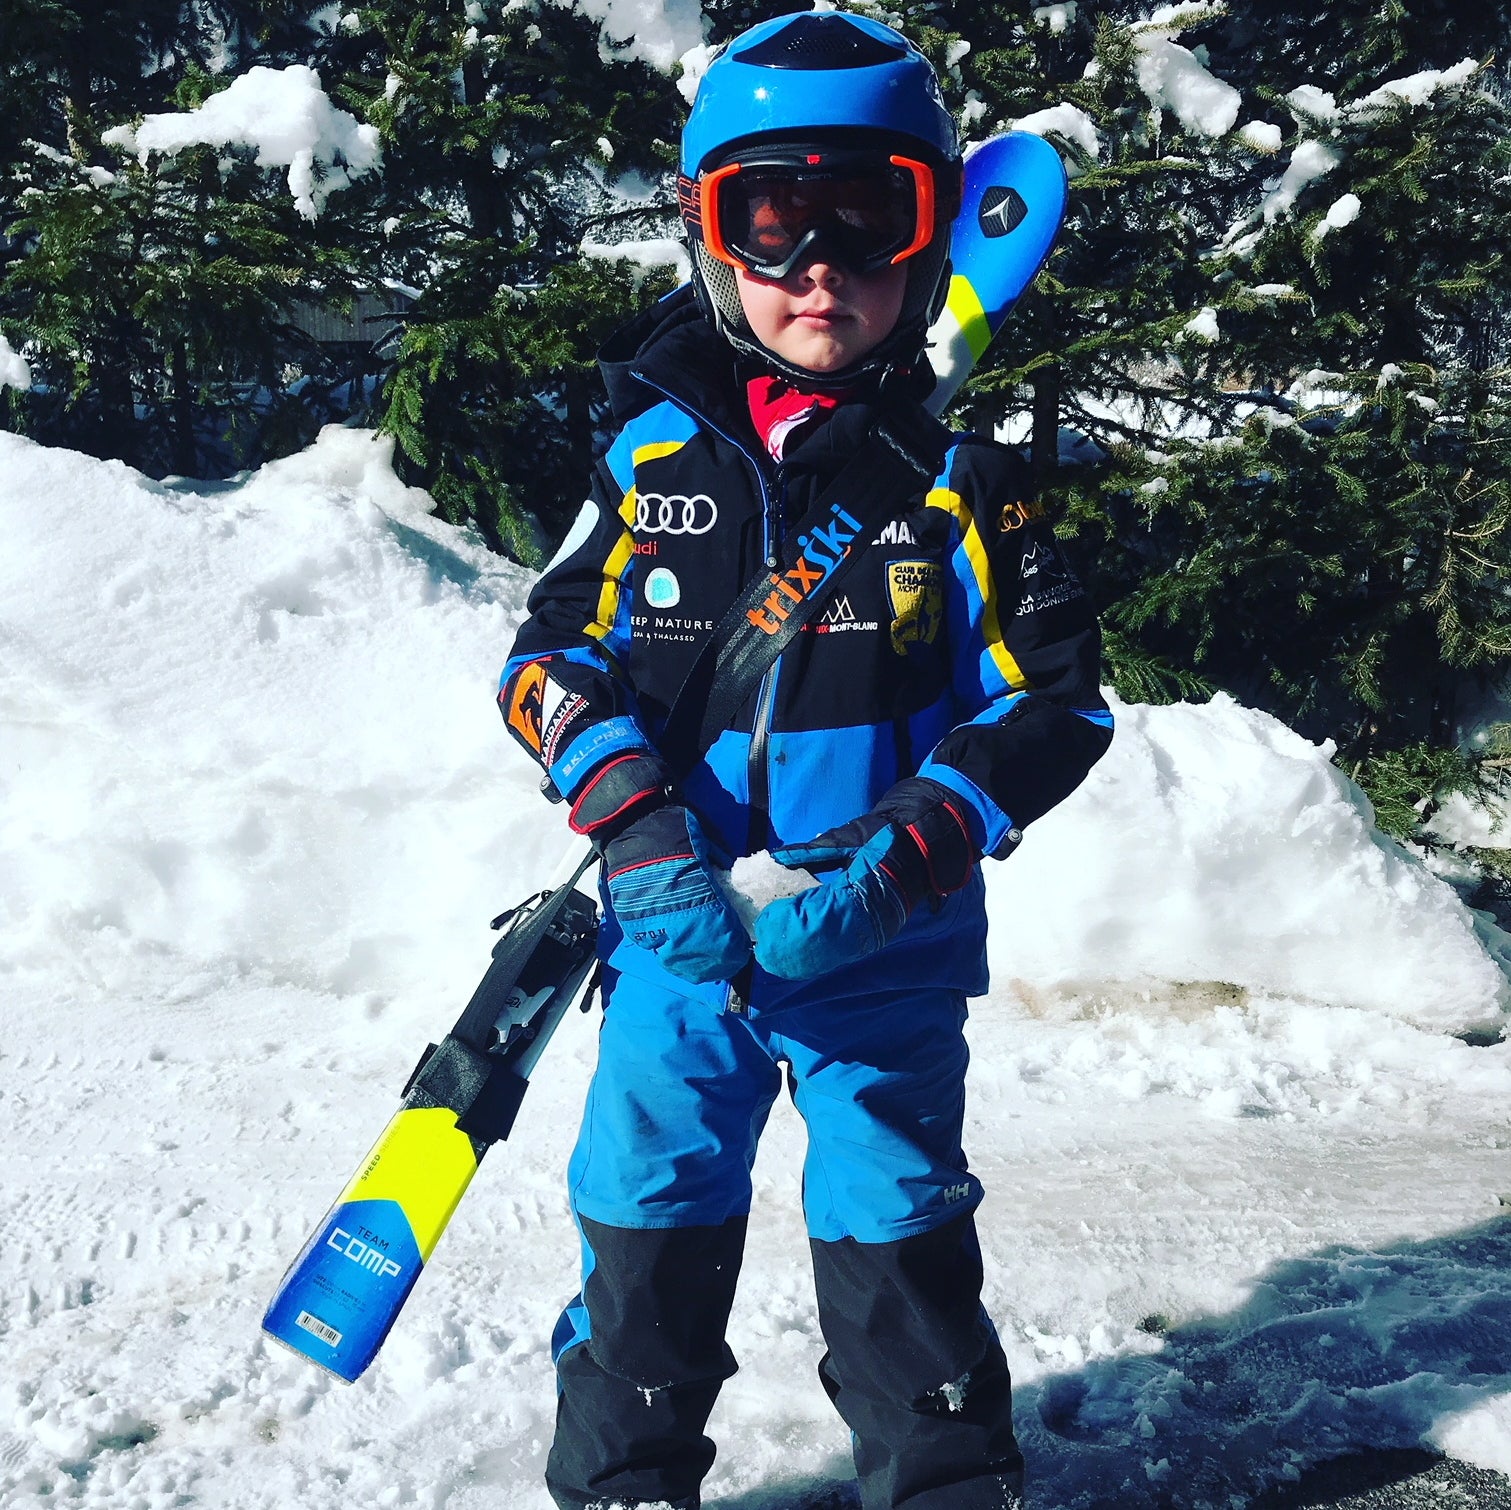 Child of 3-4 years with trixski Ski Carrier diagonally across his body to carry his skis